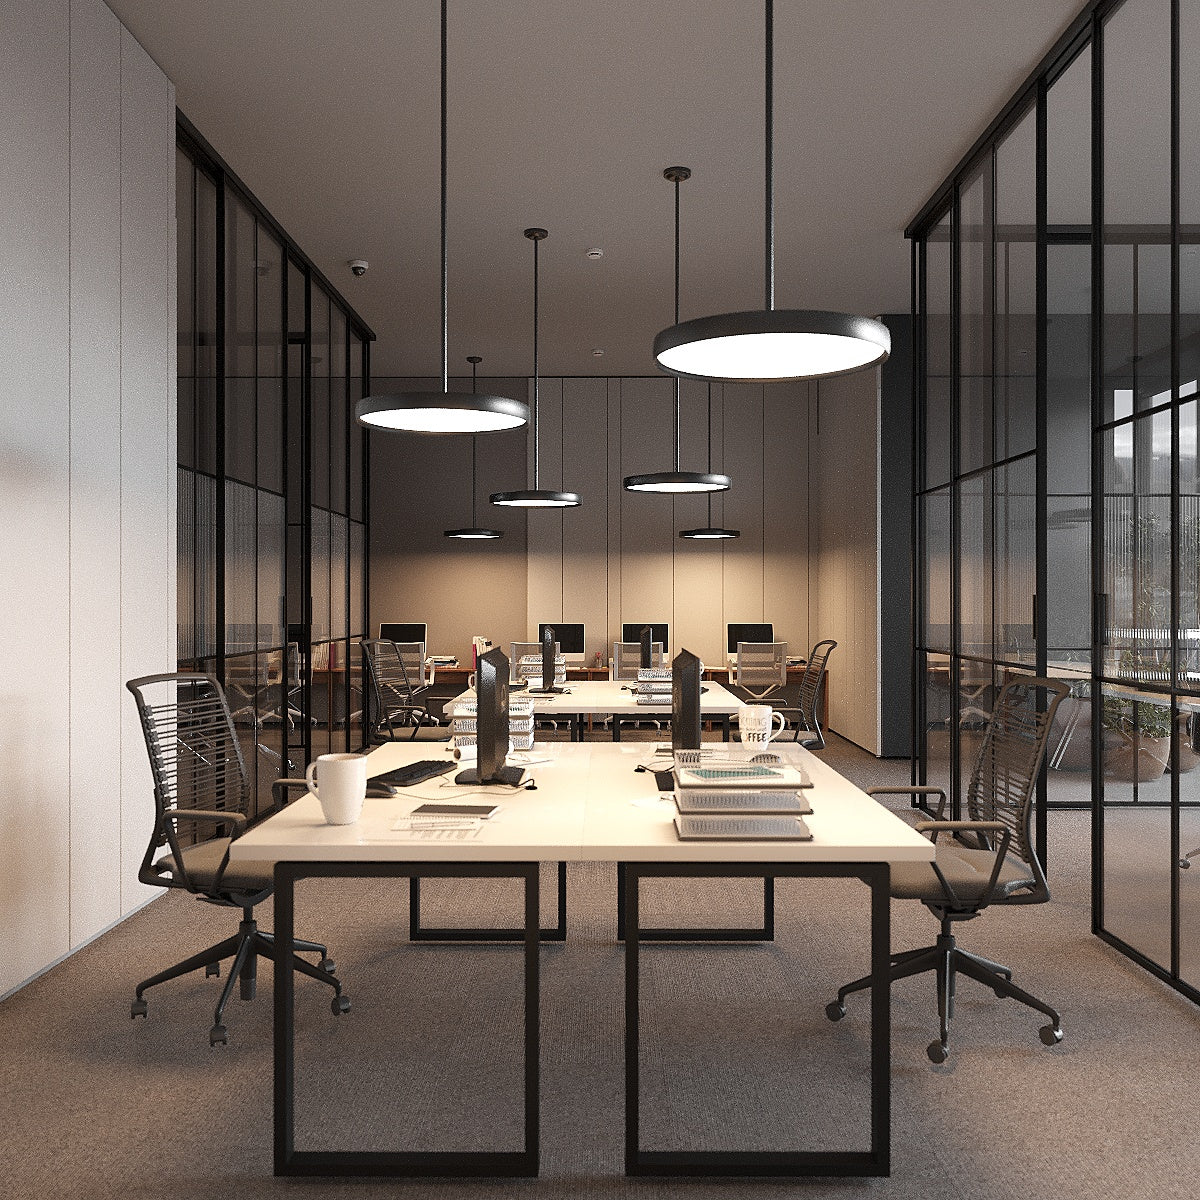 How to Design Ergonomic Workplace Lighting for Maximum Comfort and Performance